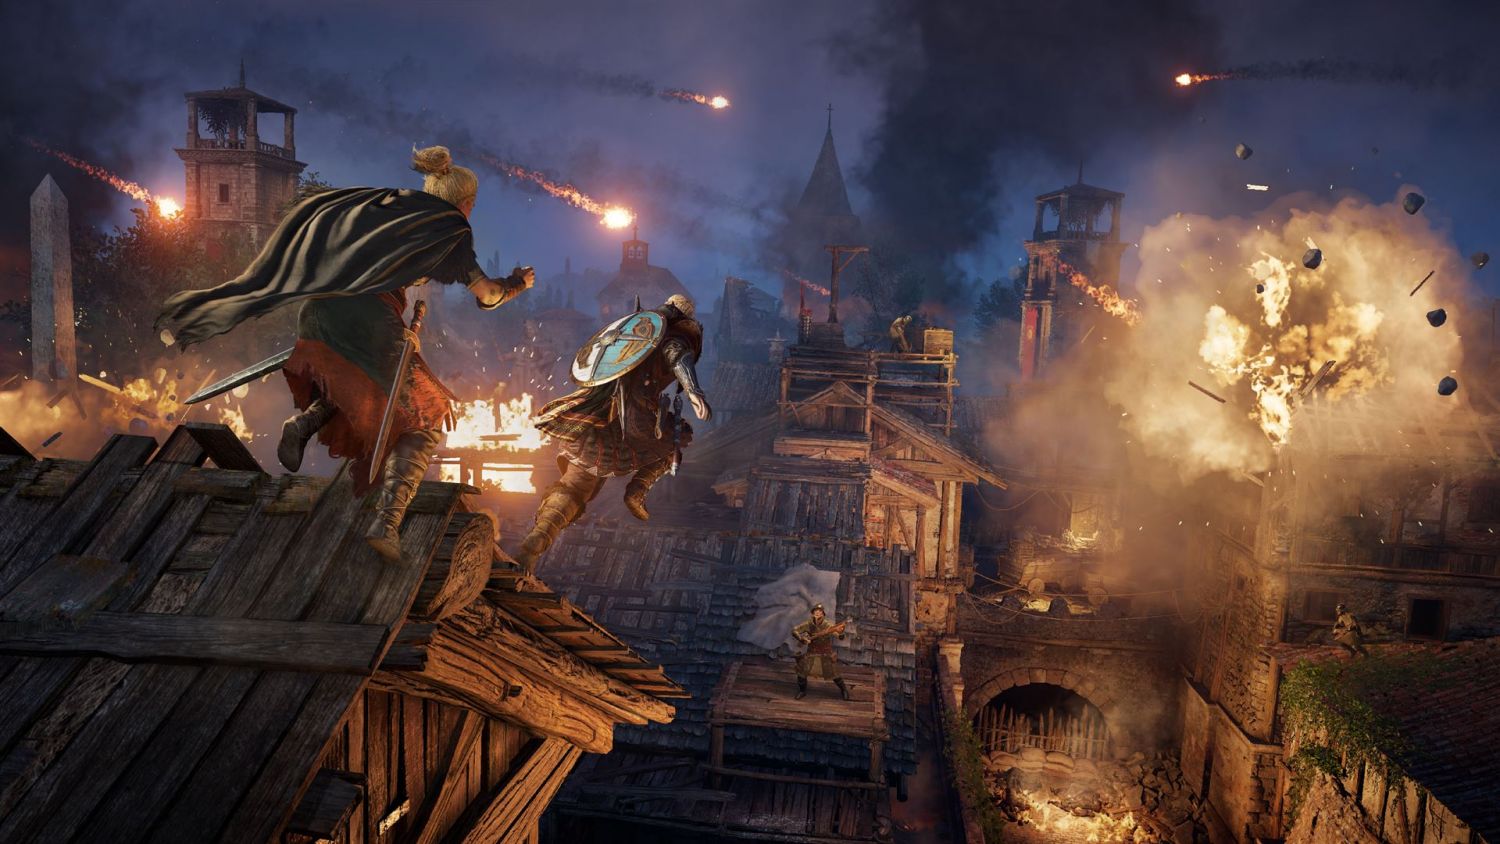 Spoiler: Today's Assassin's Creed Valhalla Trailer Won't Feature Gameplay